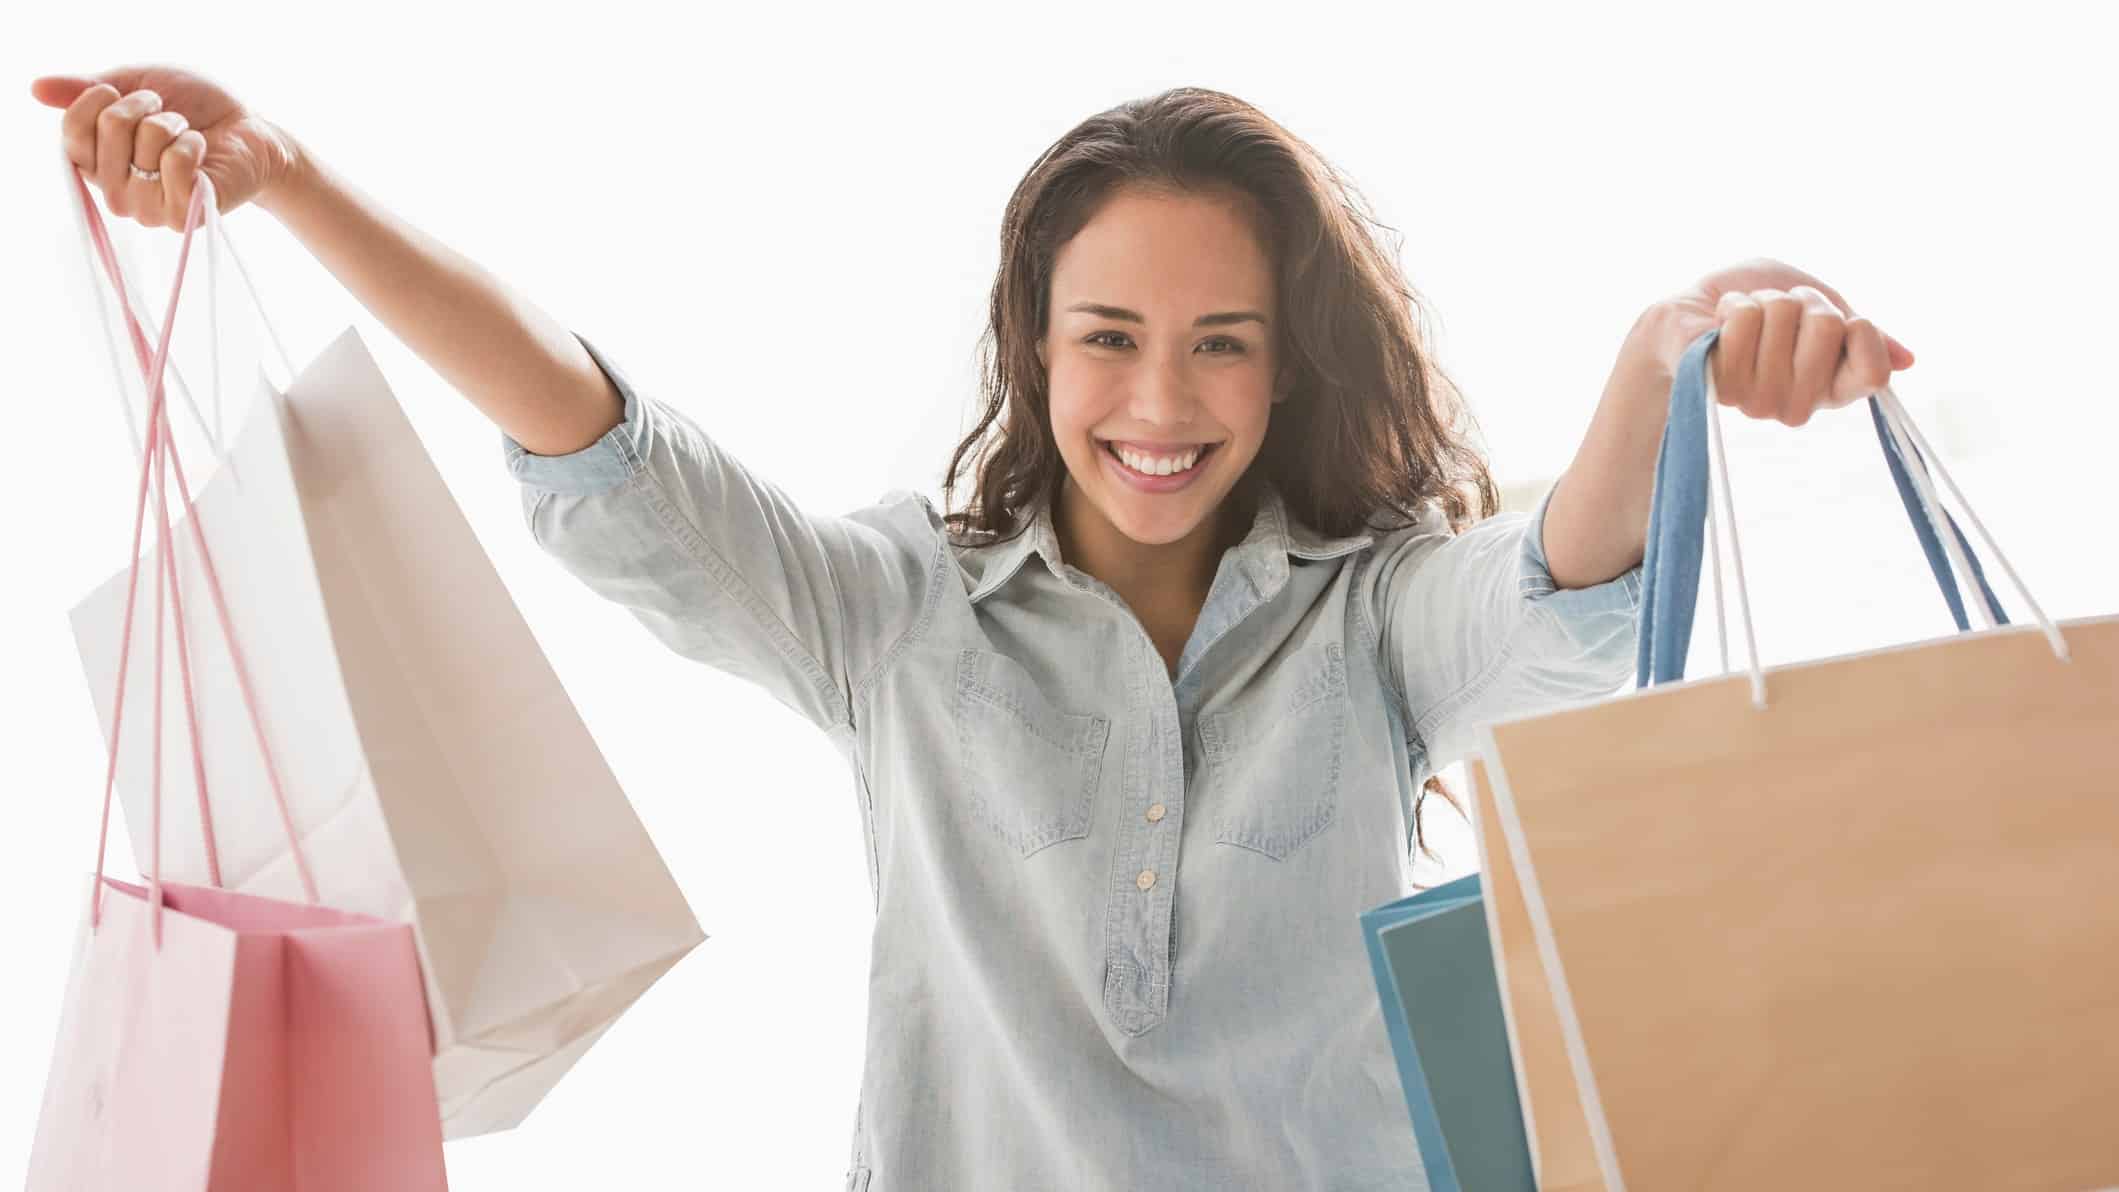 A happy shopper lifts her bags high, indicating a rising share price in ASX retail companies